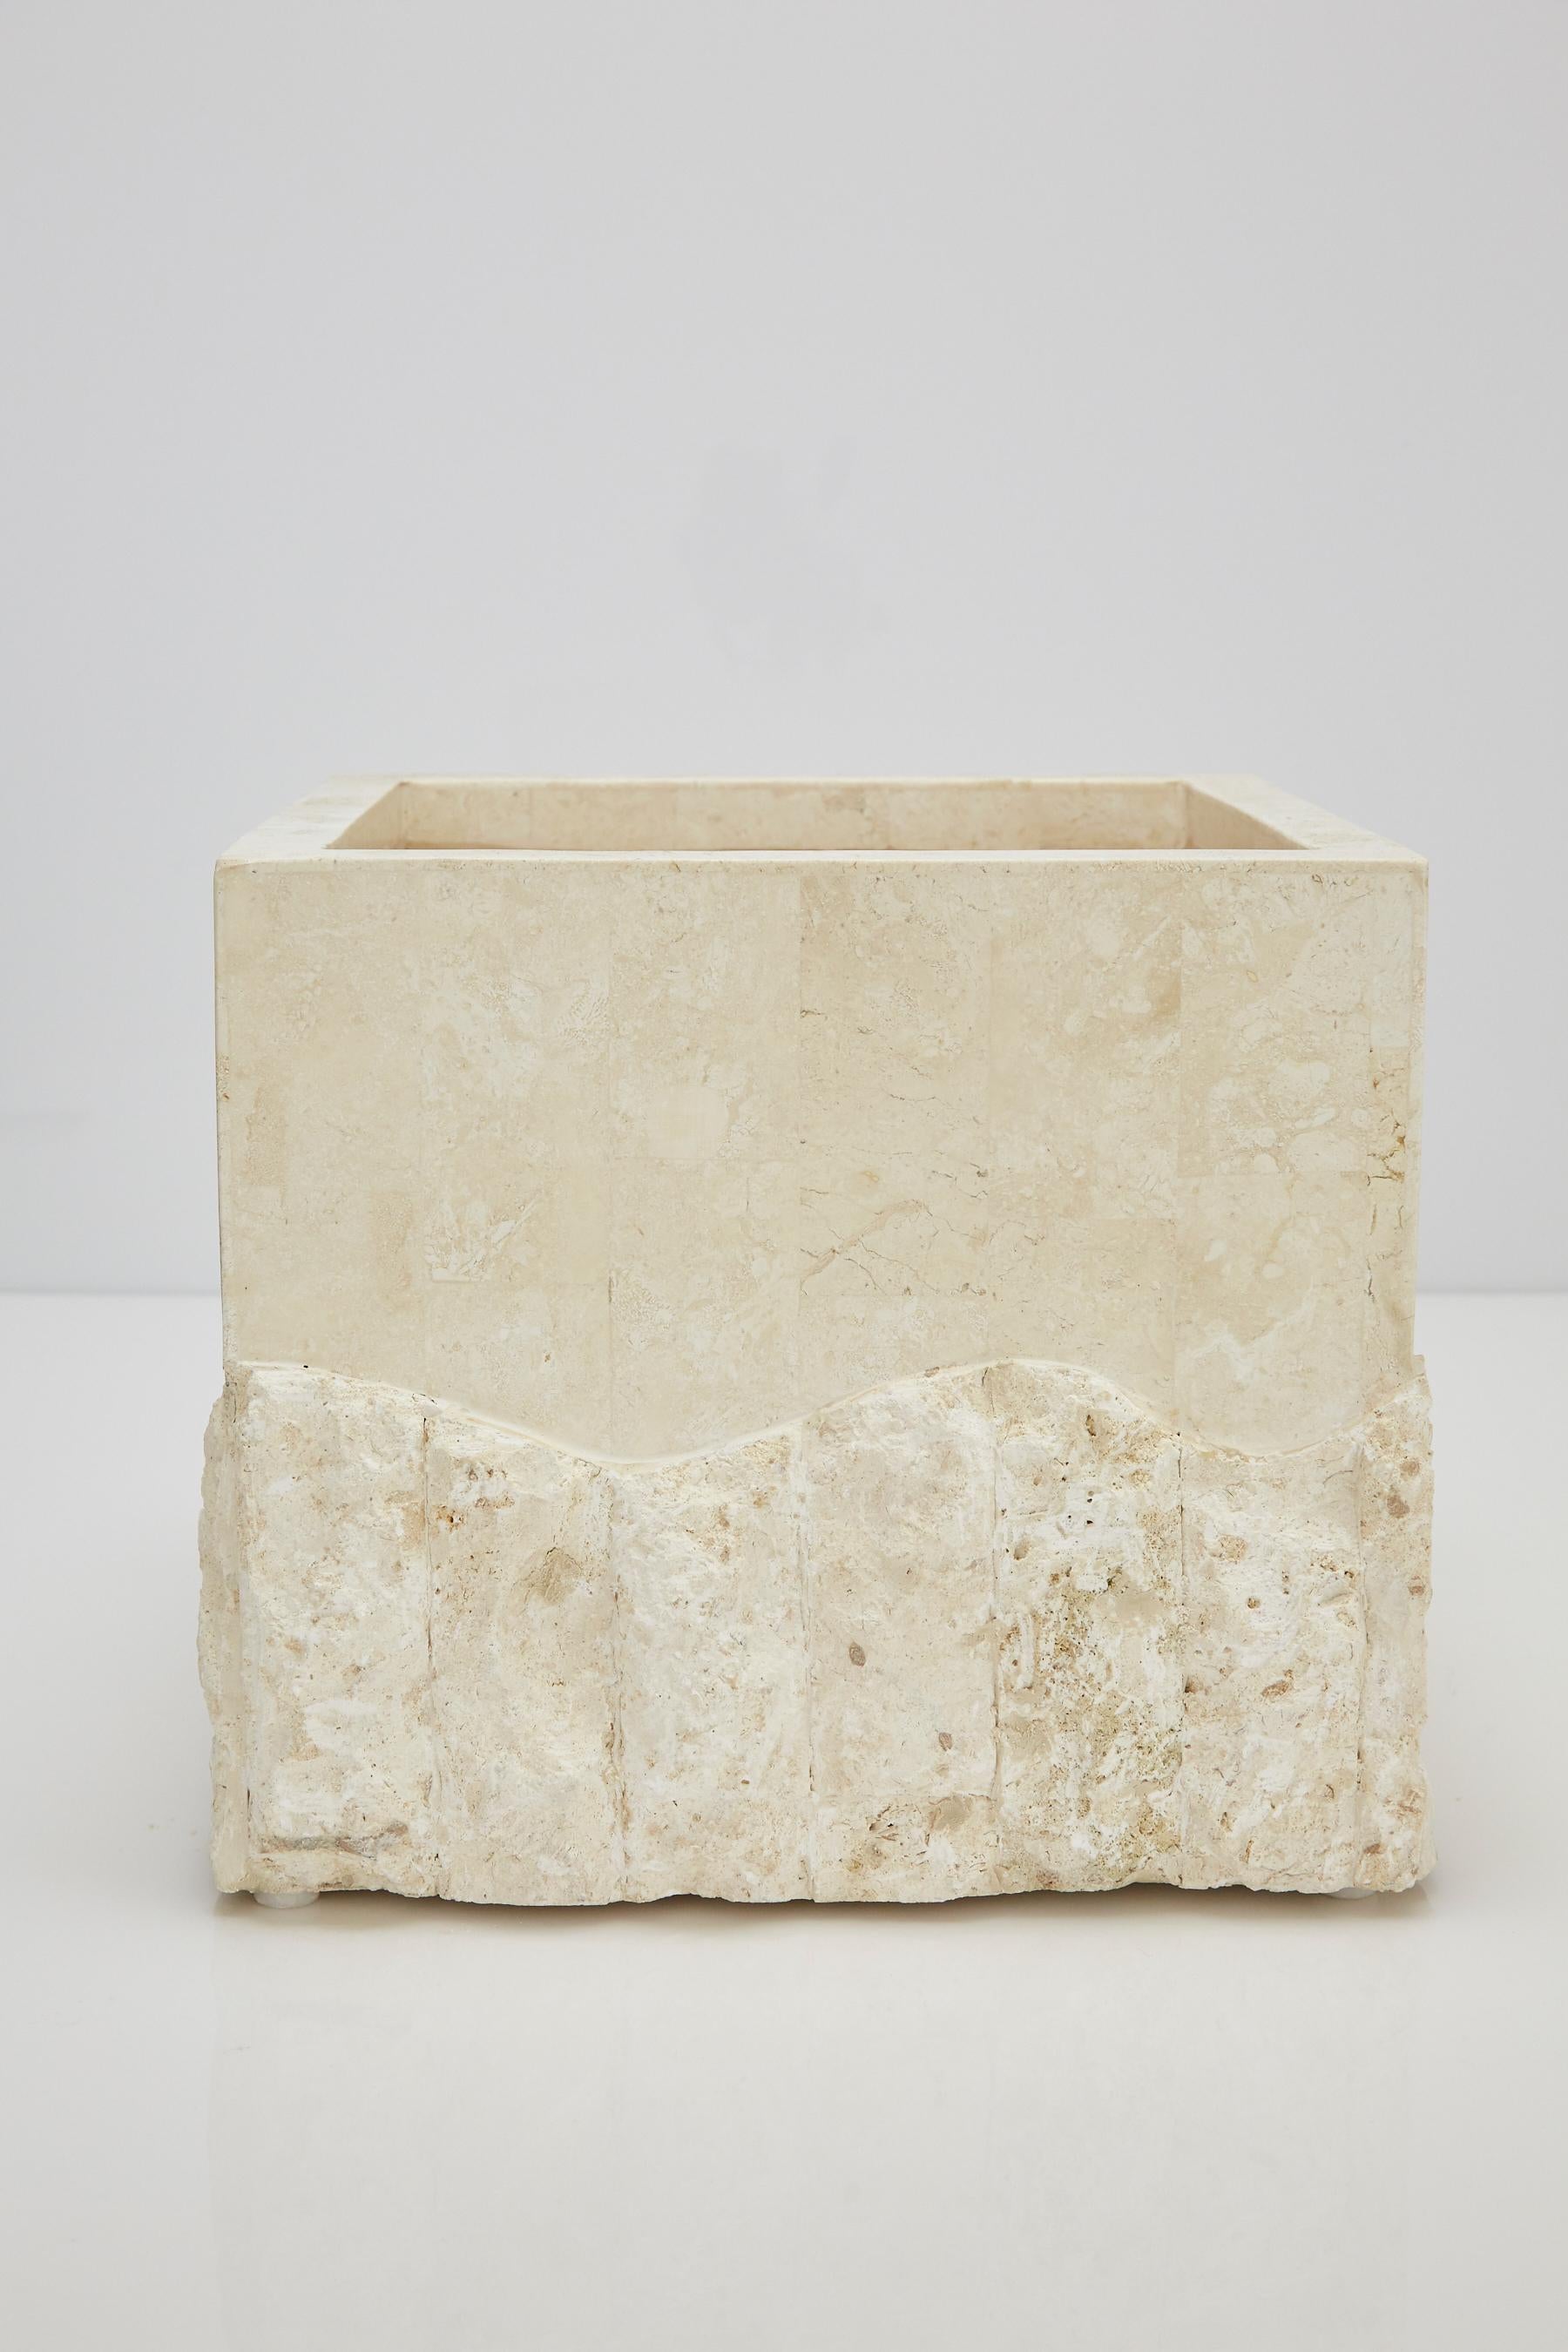 Post-Modern Medium Tessellated White Stone Square Rough and Smooth Planter, 1990s For Sale